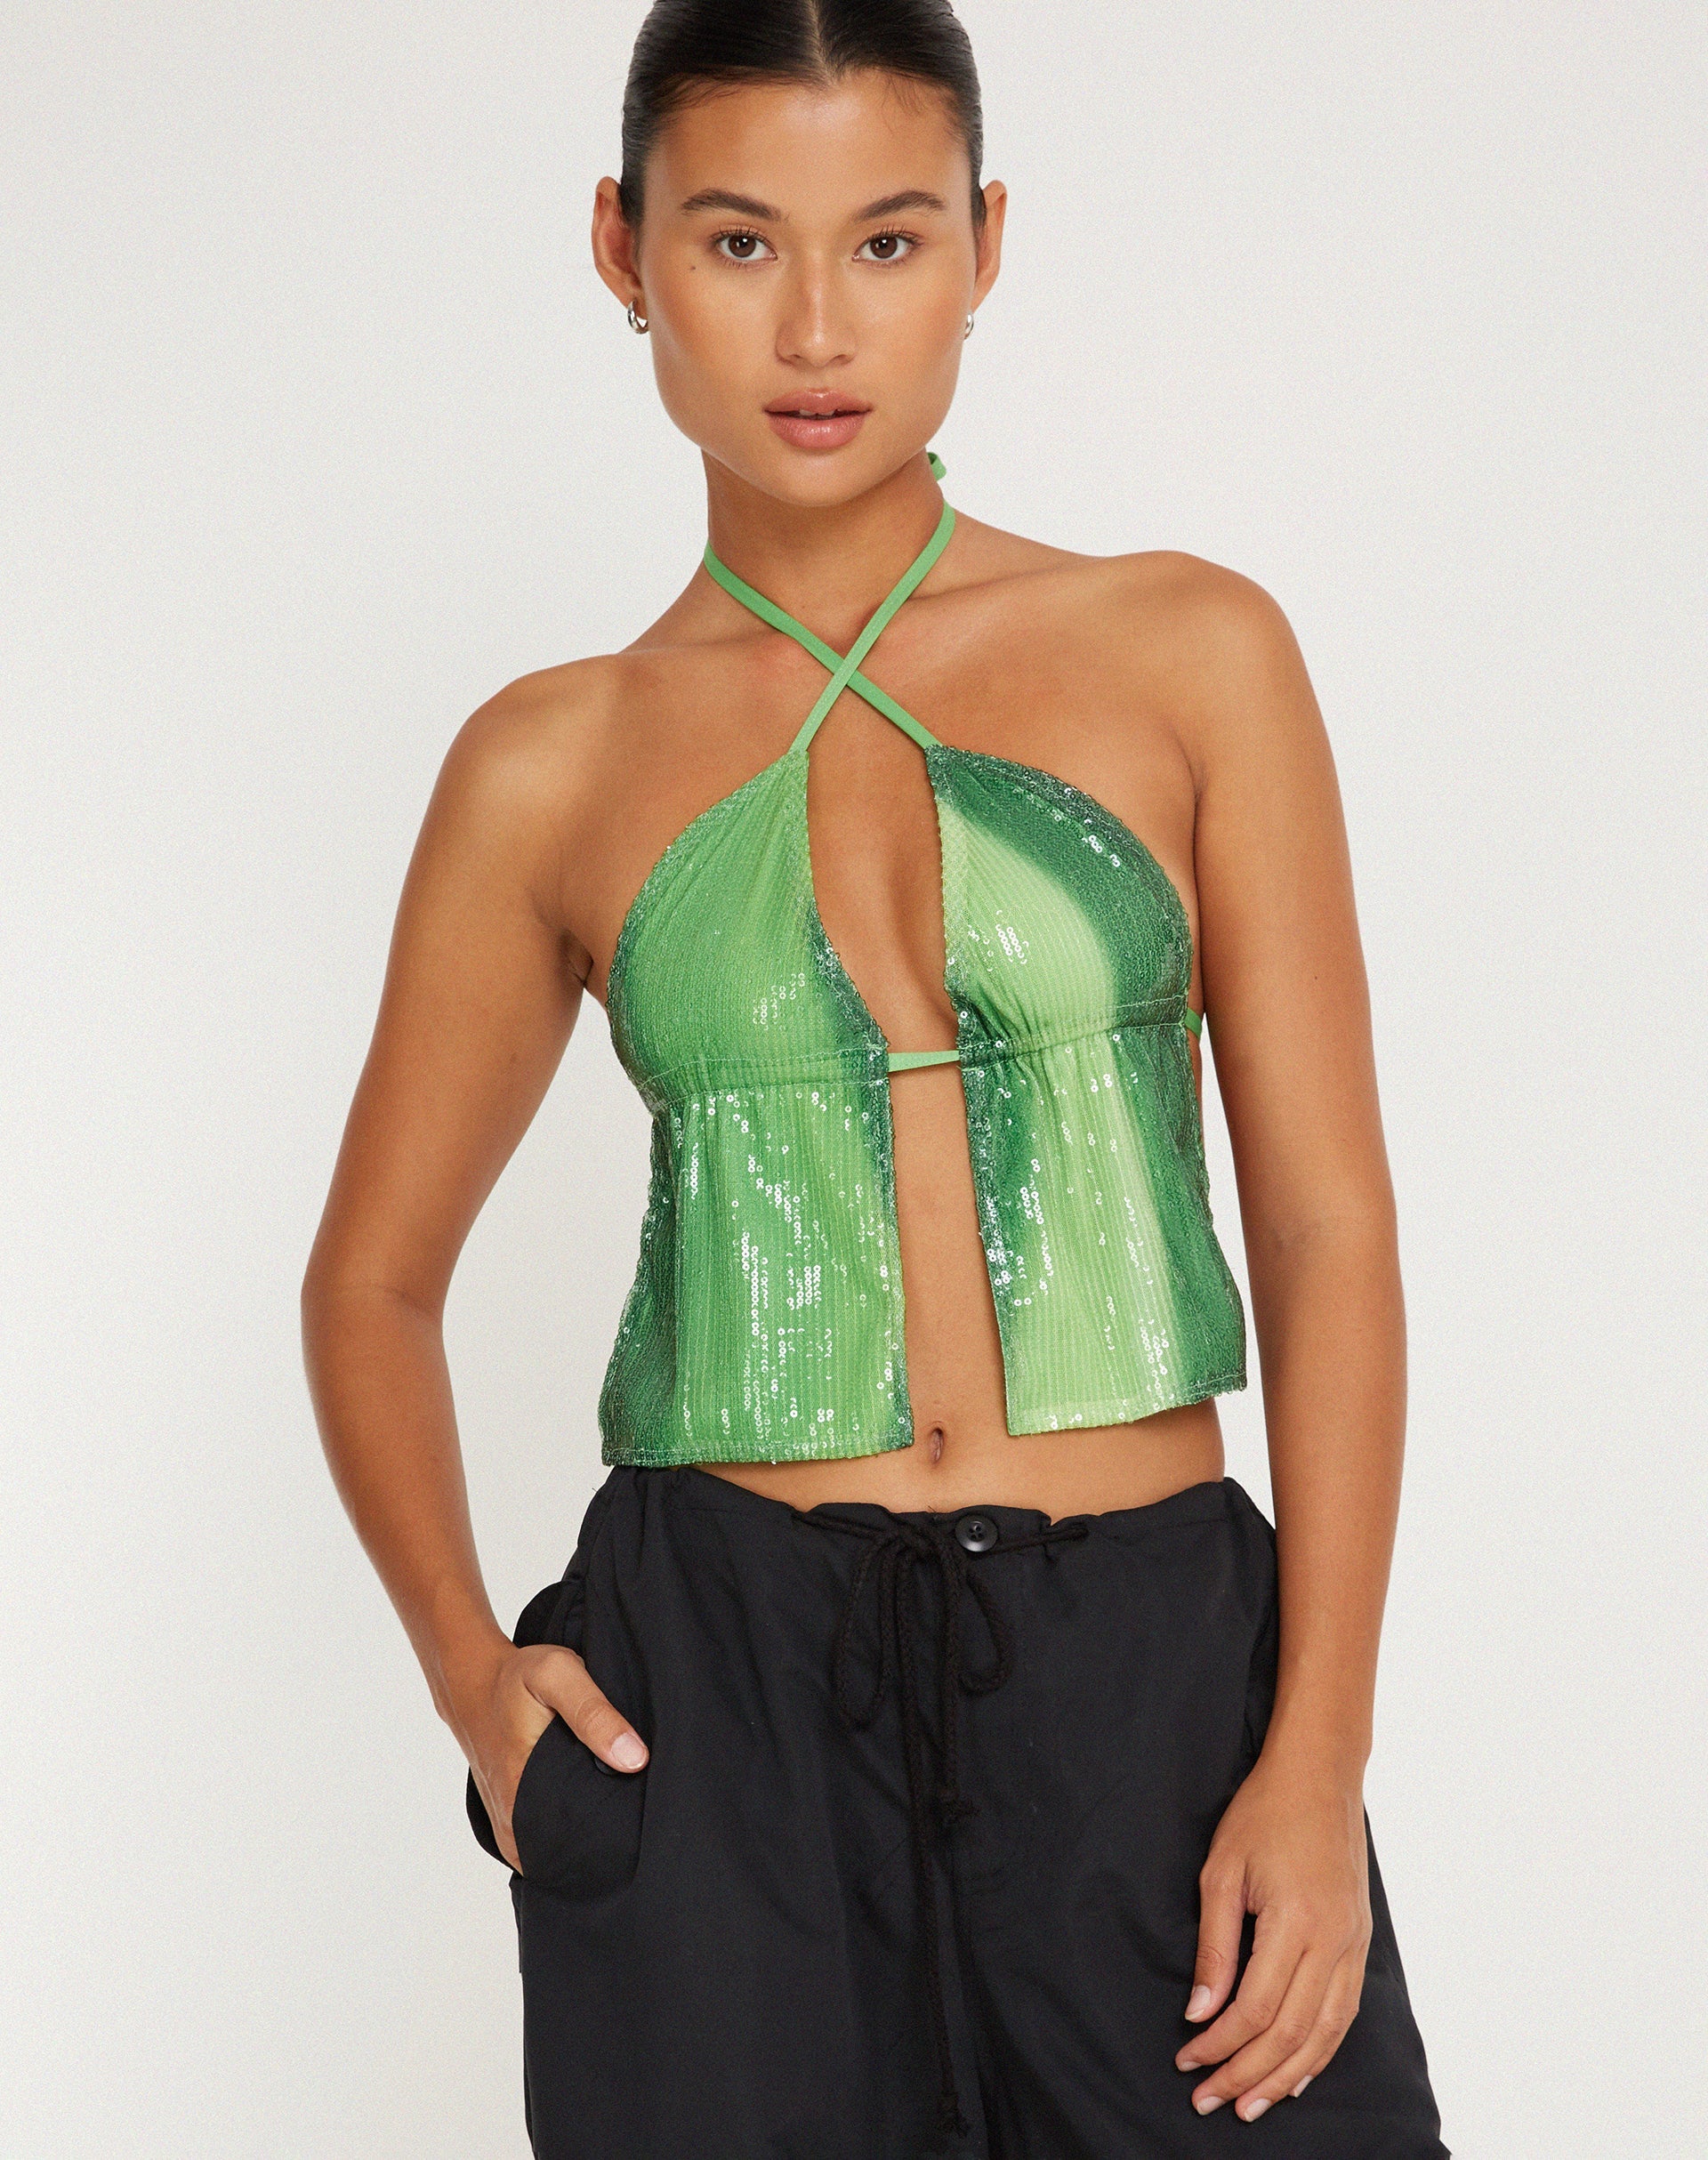 image of Runita Top in Sequin Solarized Green